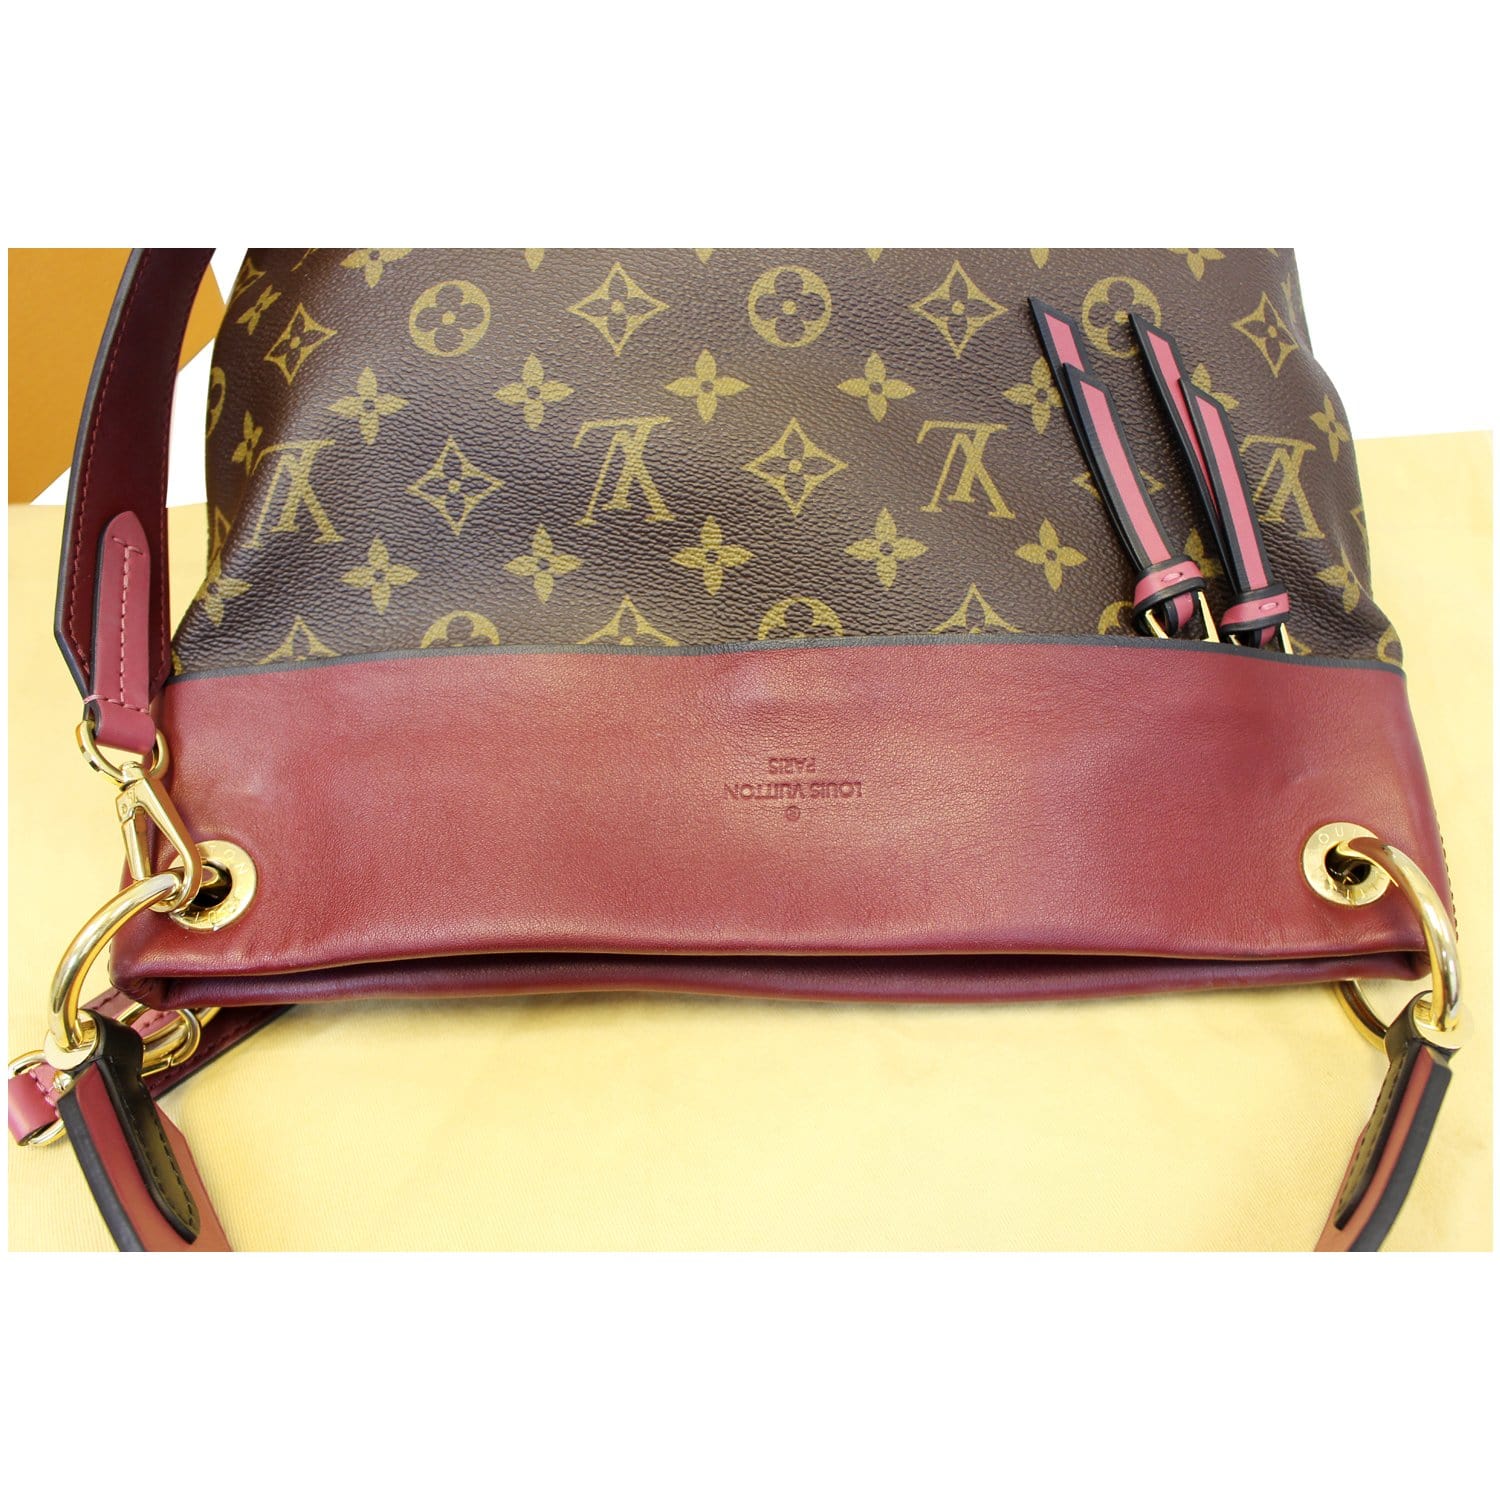 Louis Vuitton Tuileries Besace Bag Monogram Canvas with Leather Brown  22464662